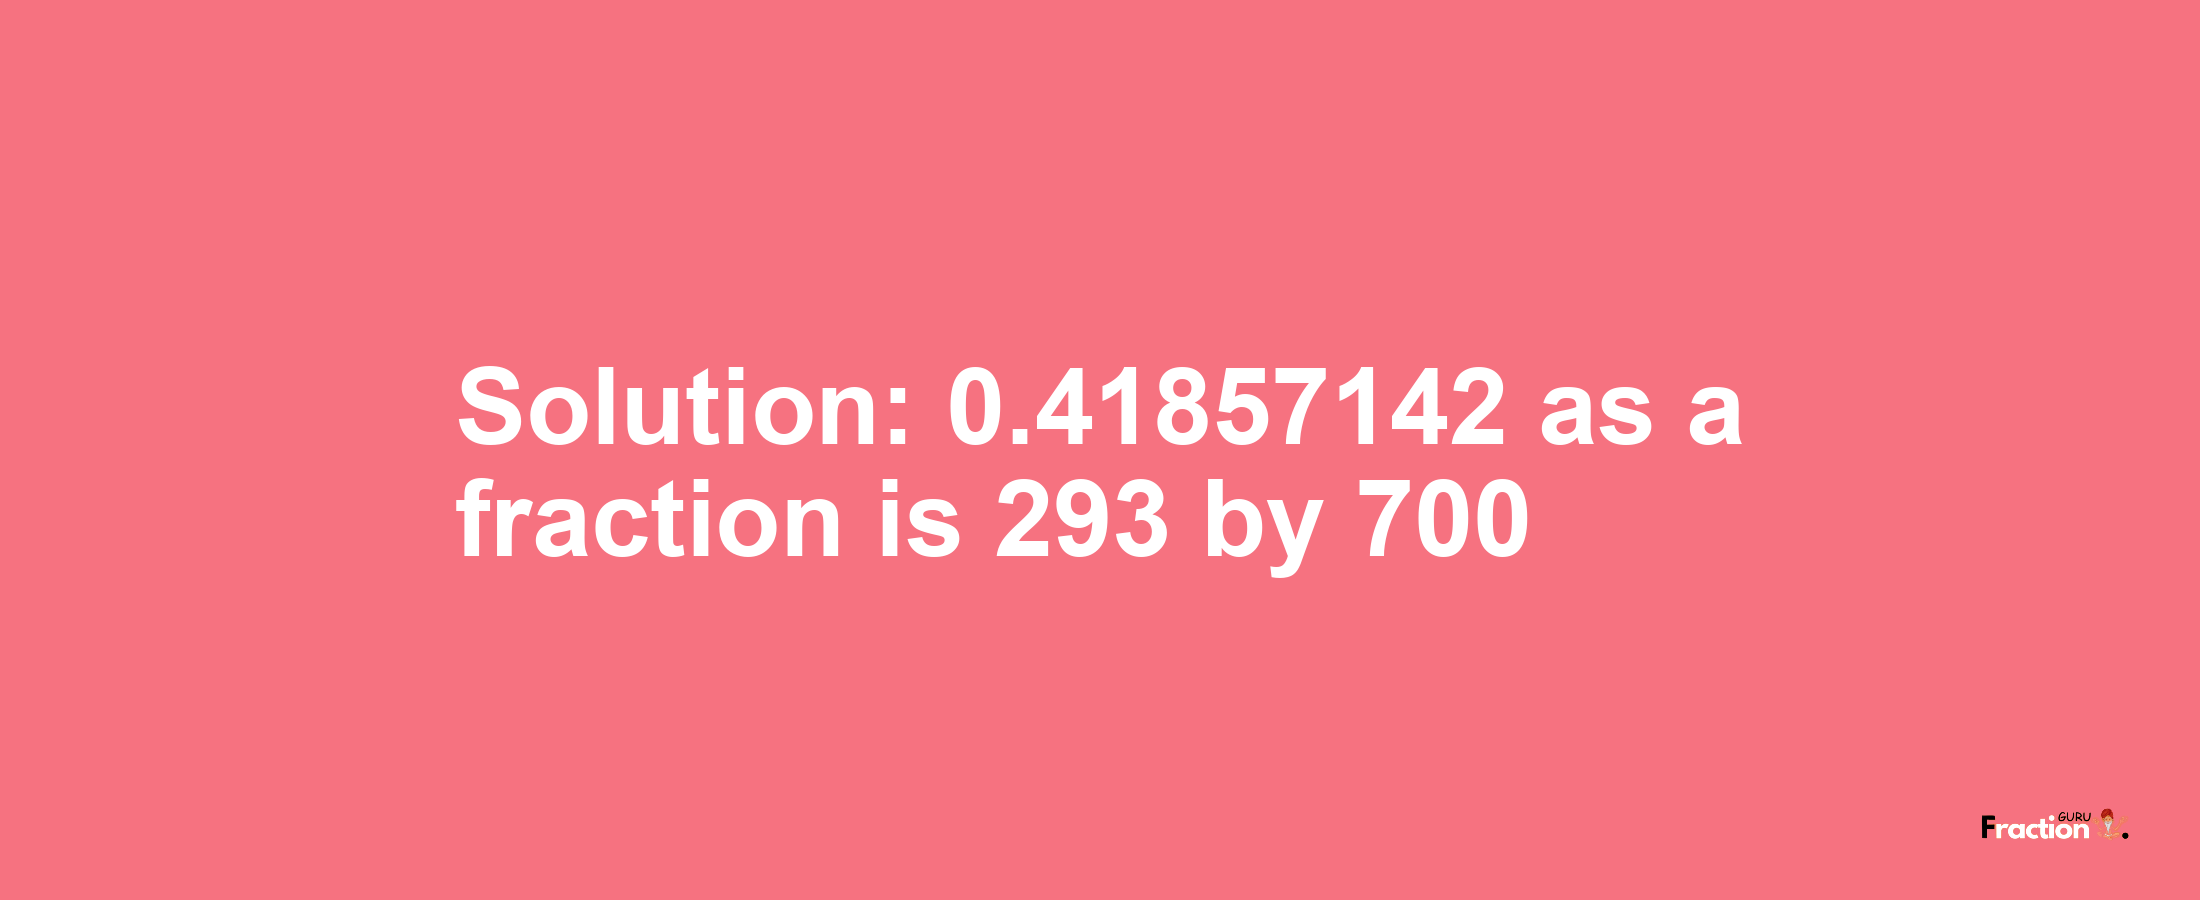 Solution:0.41857142 as a fraction is 293/700